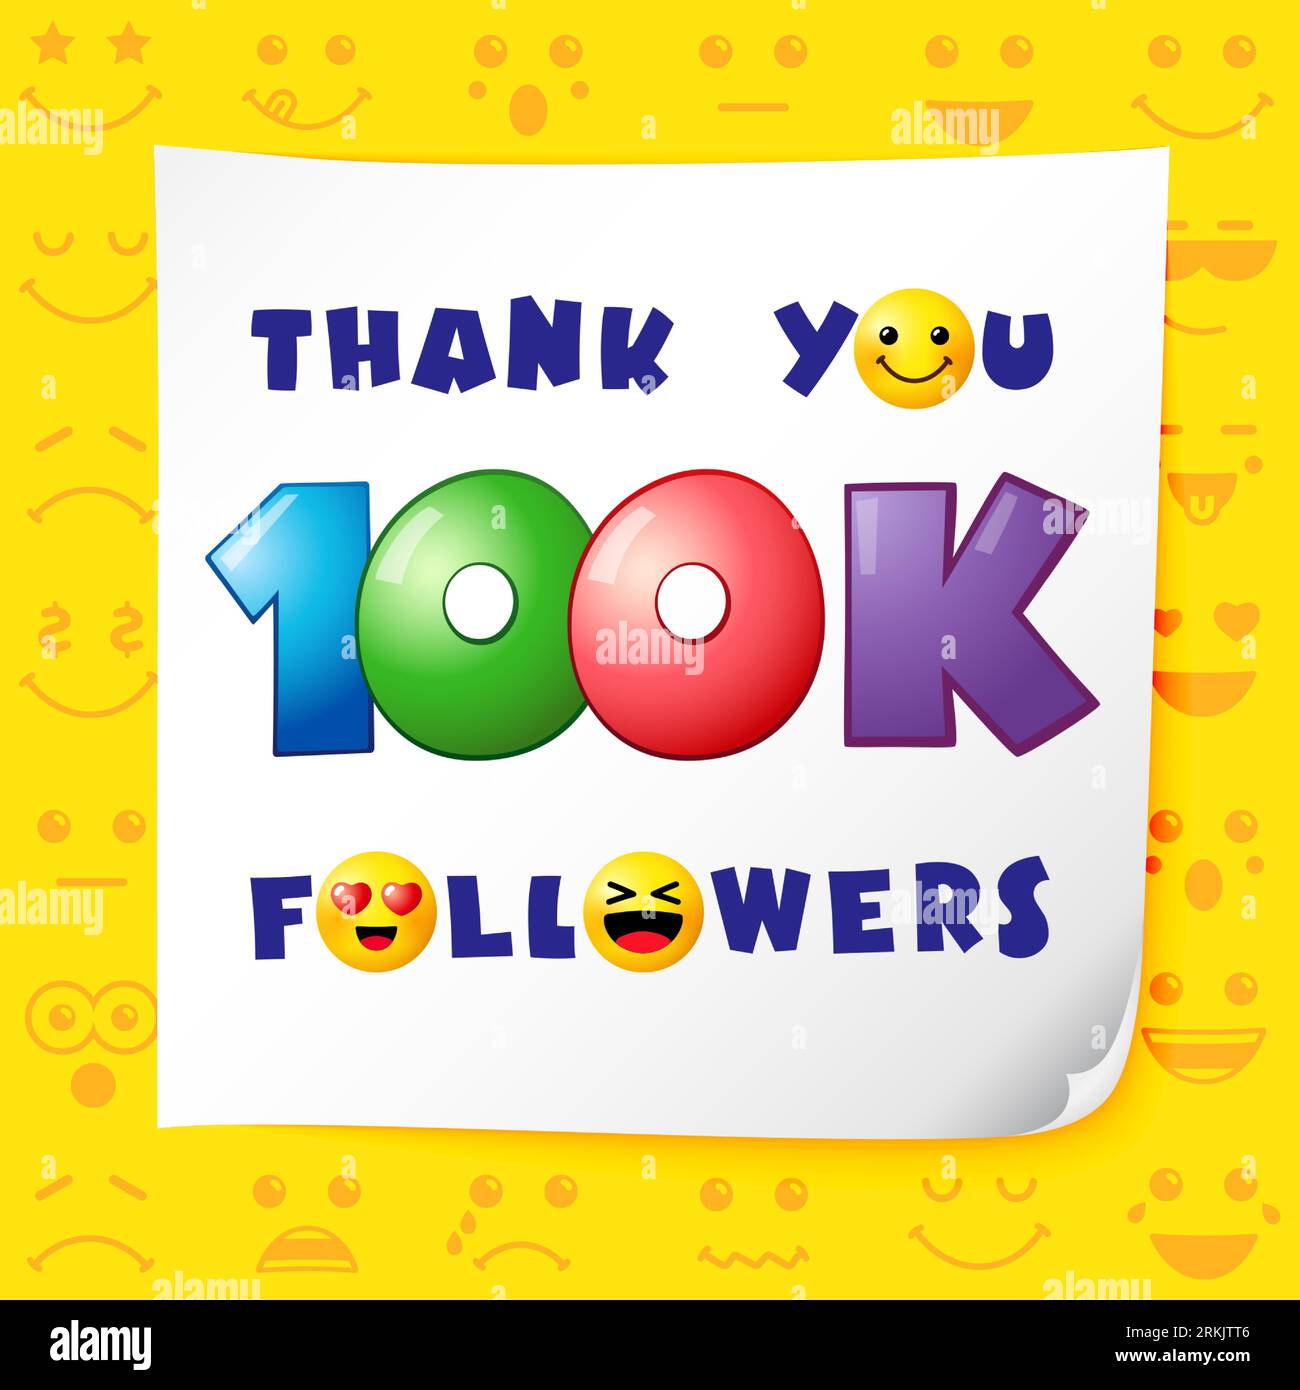 Thank you 100K followers social media poster. Set of emoticons. Positive thanks for 100 K following users. Creative background. 100 000 colorful sign Stock Vector